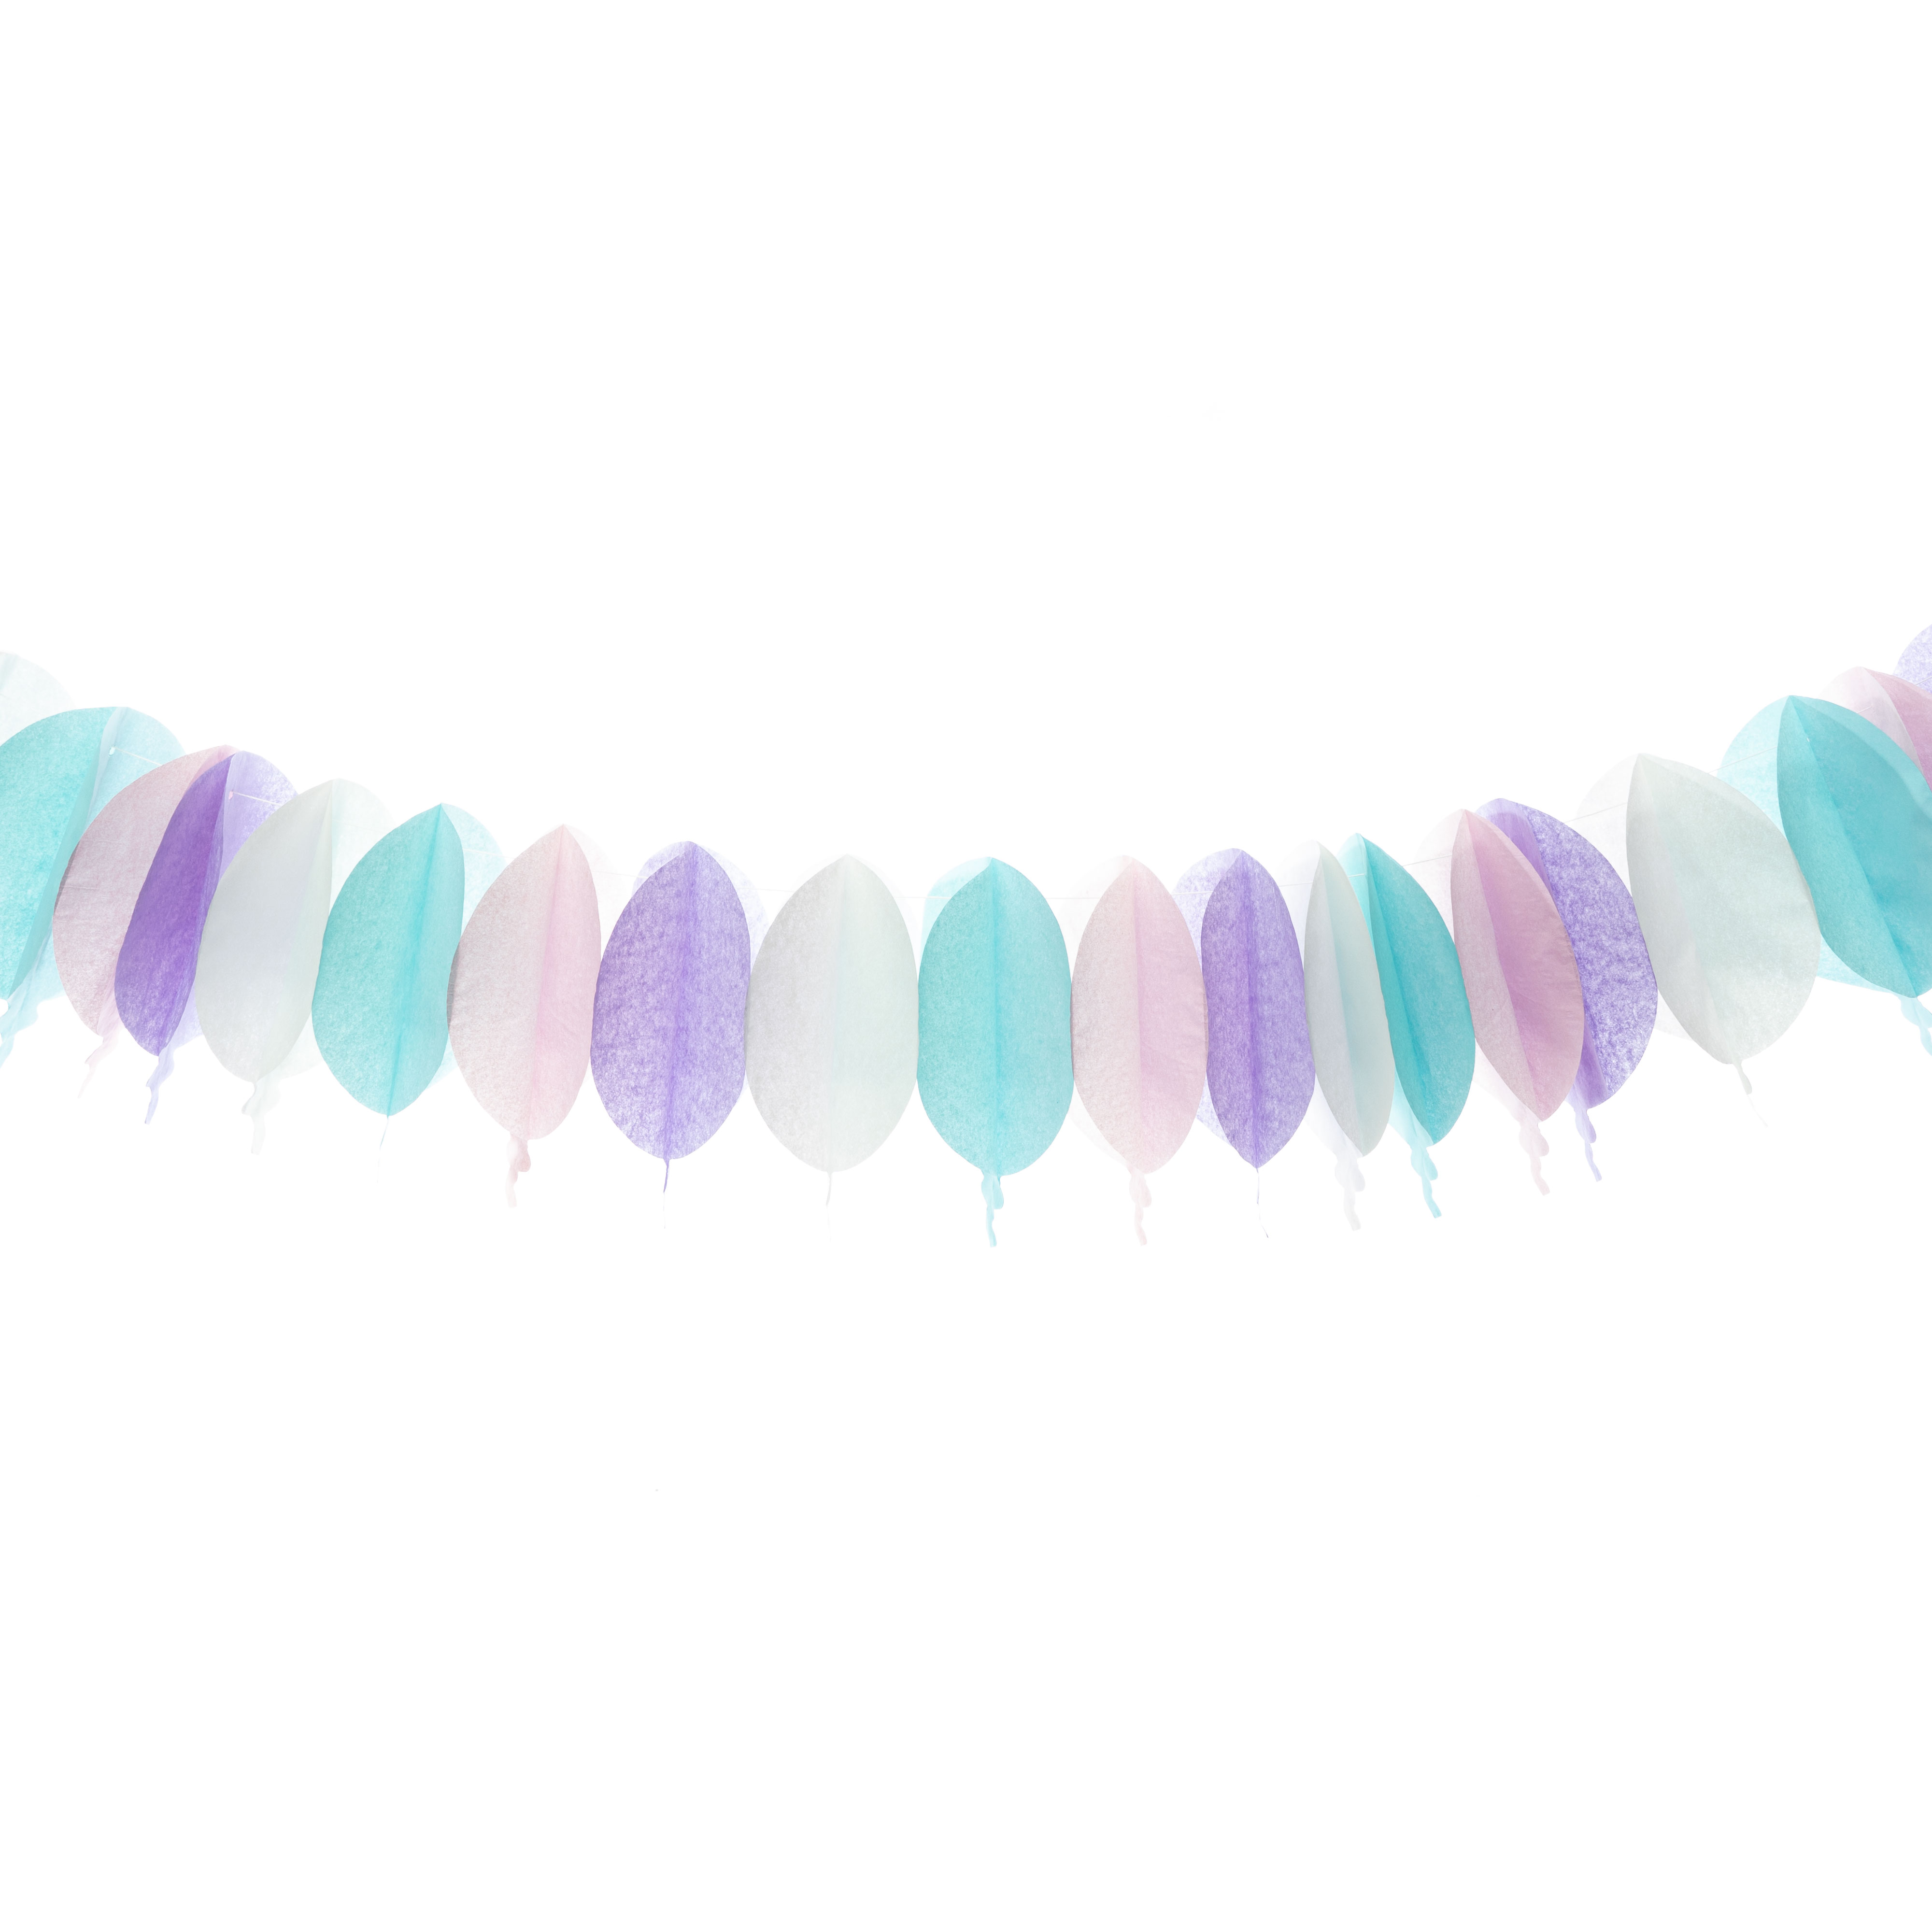 Balloon Shaped Paper Garland 12ft - Multicolor